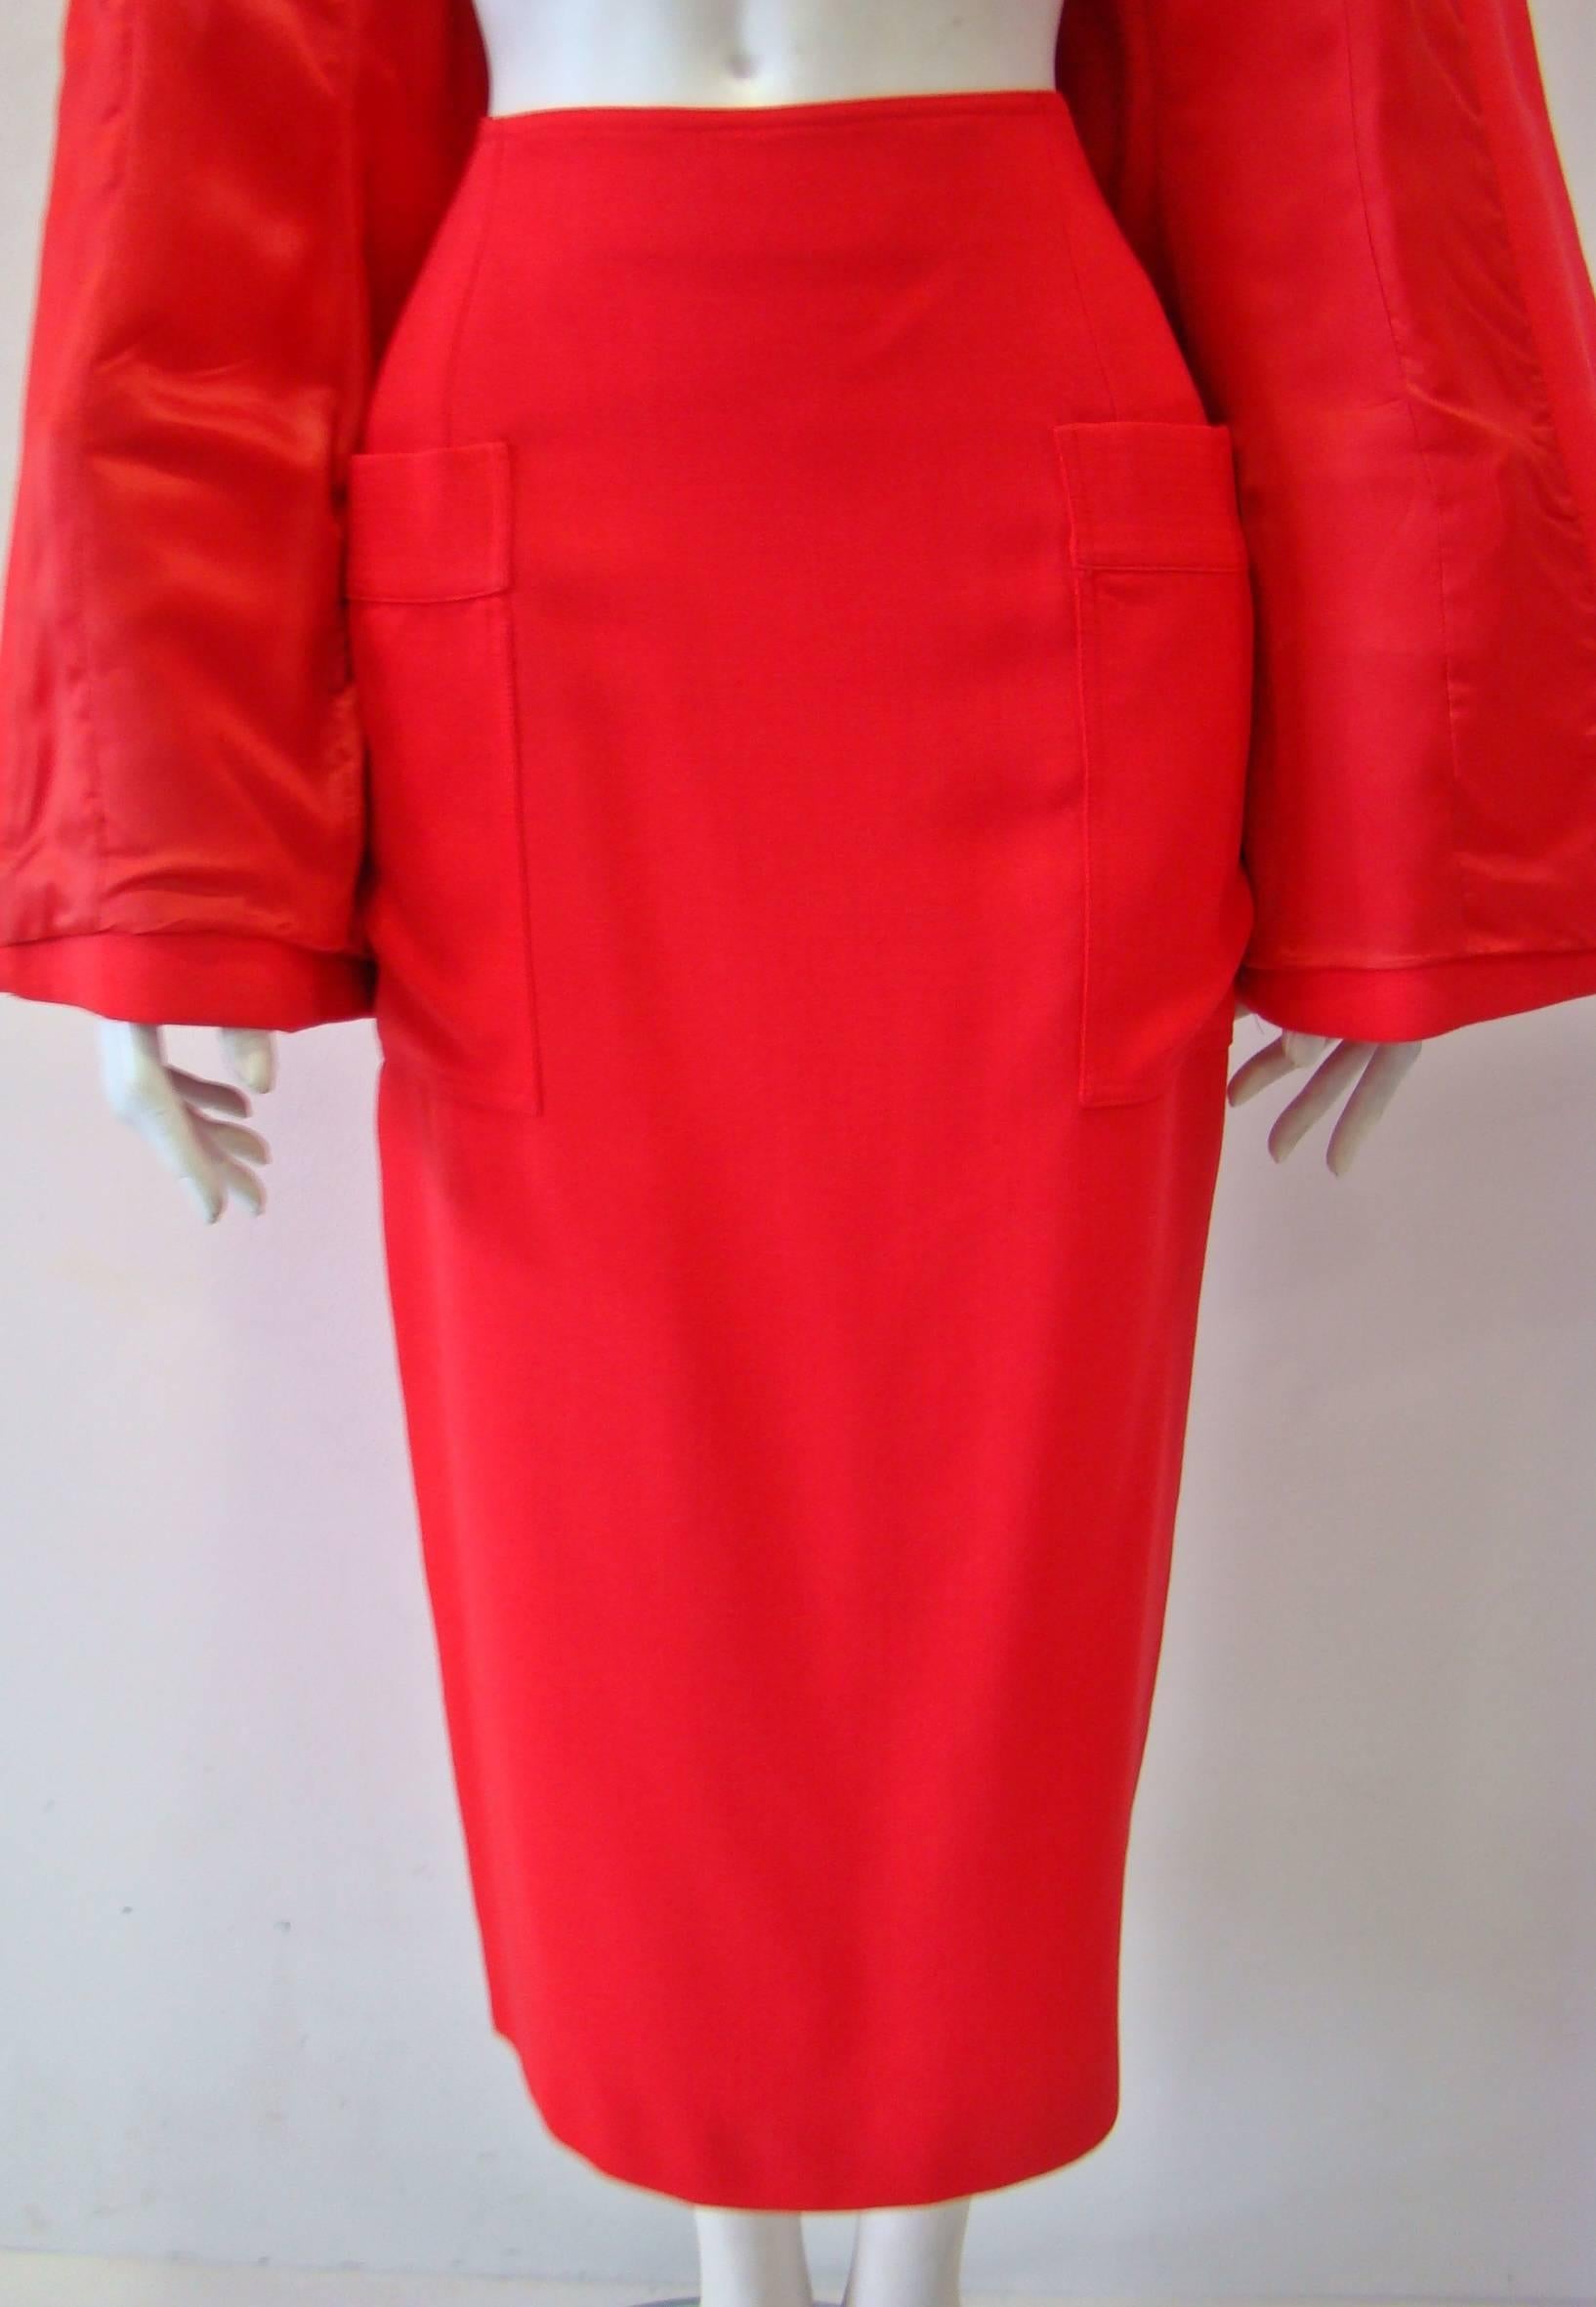 Istante By Gianni Versace Frinde Skirt Suit Fall 1992 In New Condition For Sale In Athens, Agia Paraskevi